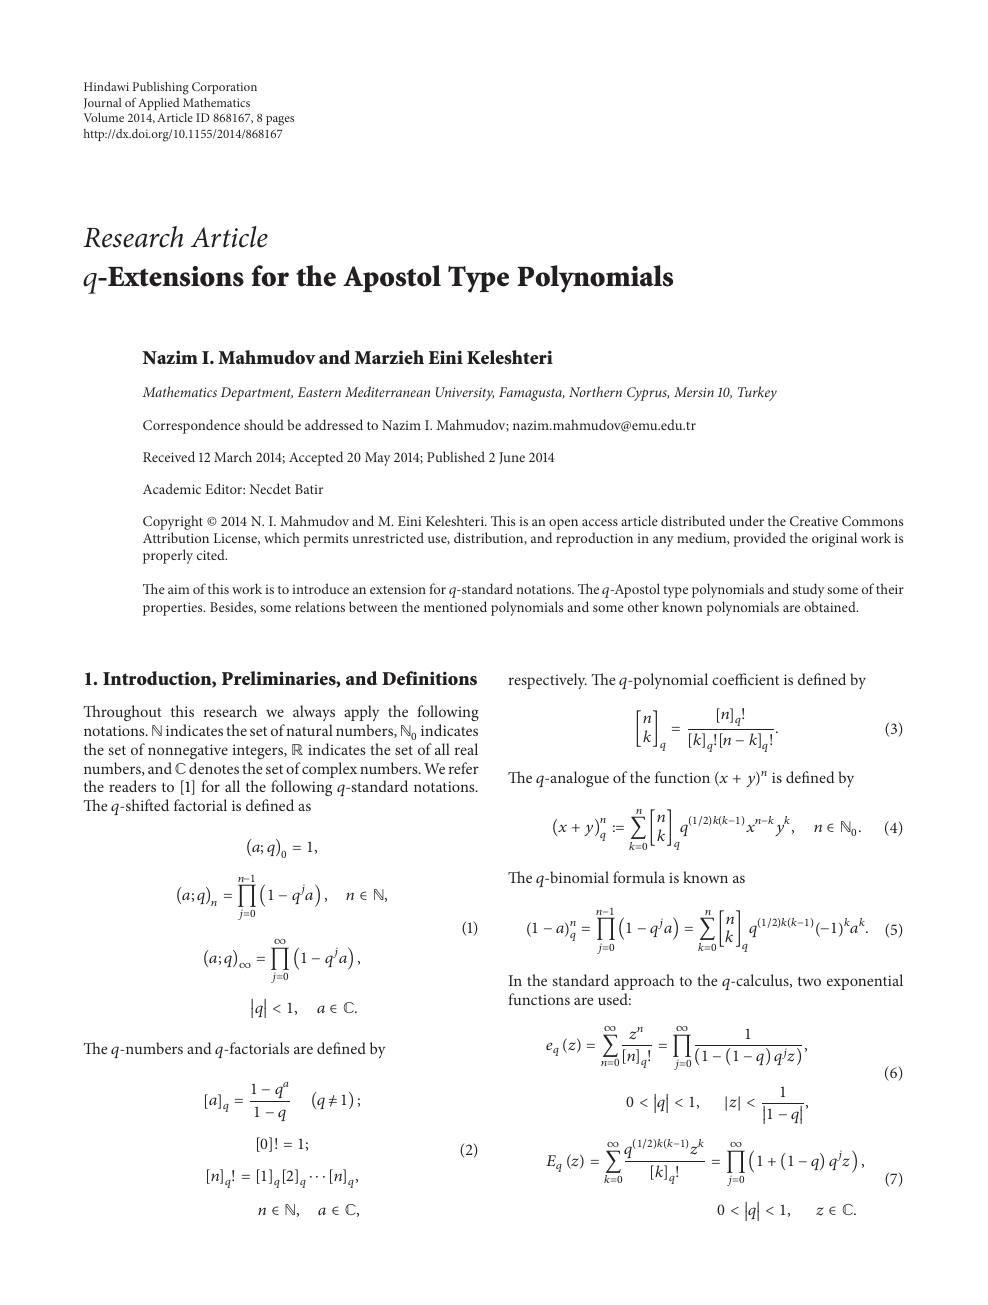 Extensions For The Apostol Type Polynomials Topic Of Research Paper In Mathematics Download Scholarly Article Pdf And Read For Free On Cyberleninka Open Science Hub